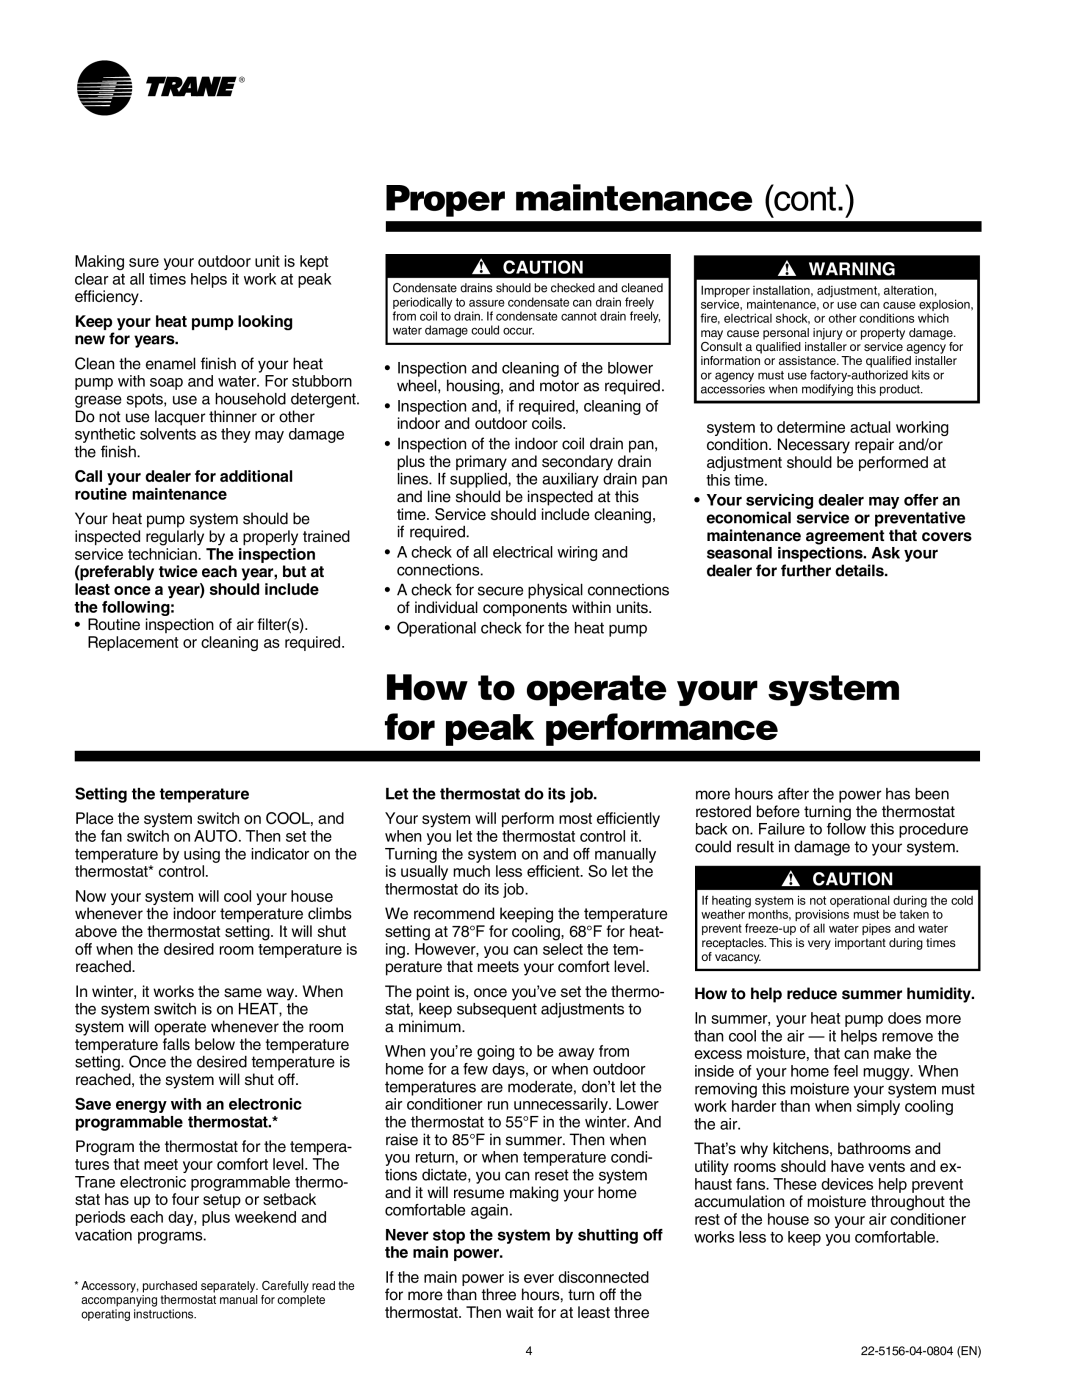 Trane 22-5156-04-0804 Proper maintenance cont, How to operate your system for peak performance, Setting the temperature 